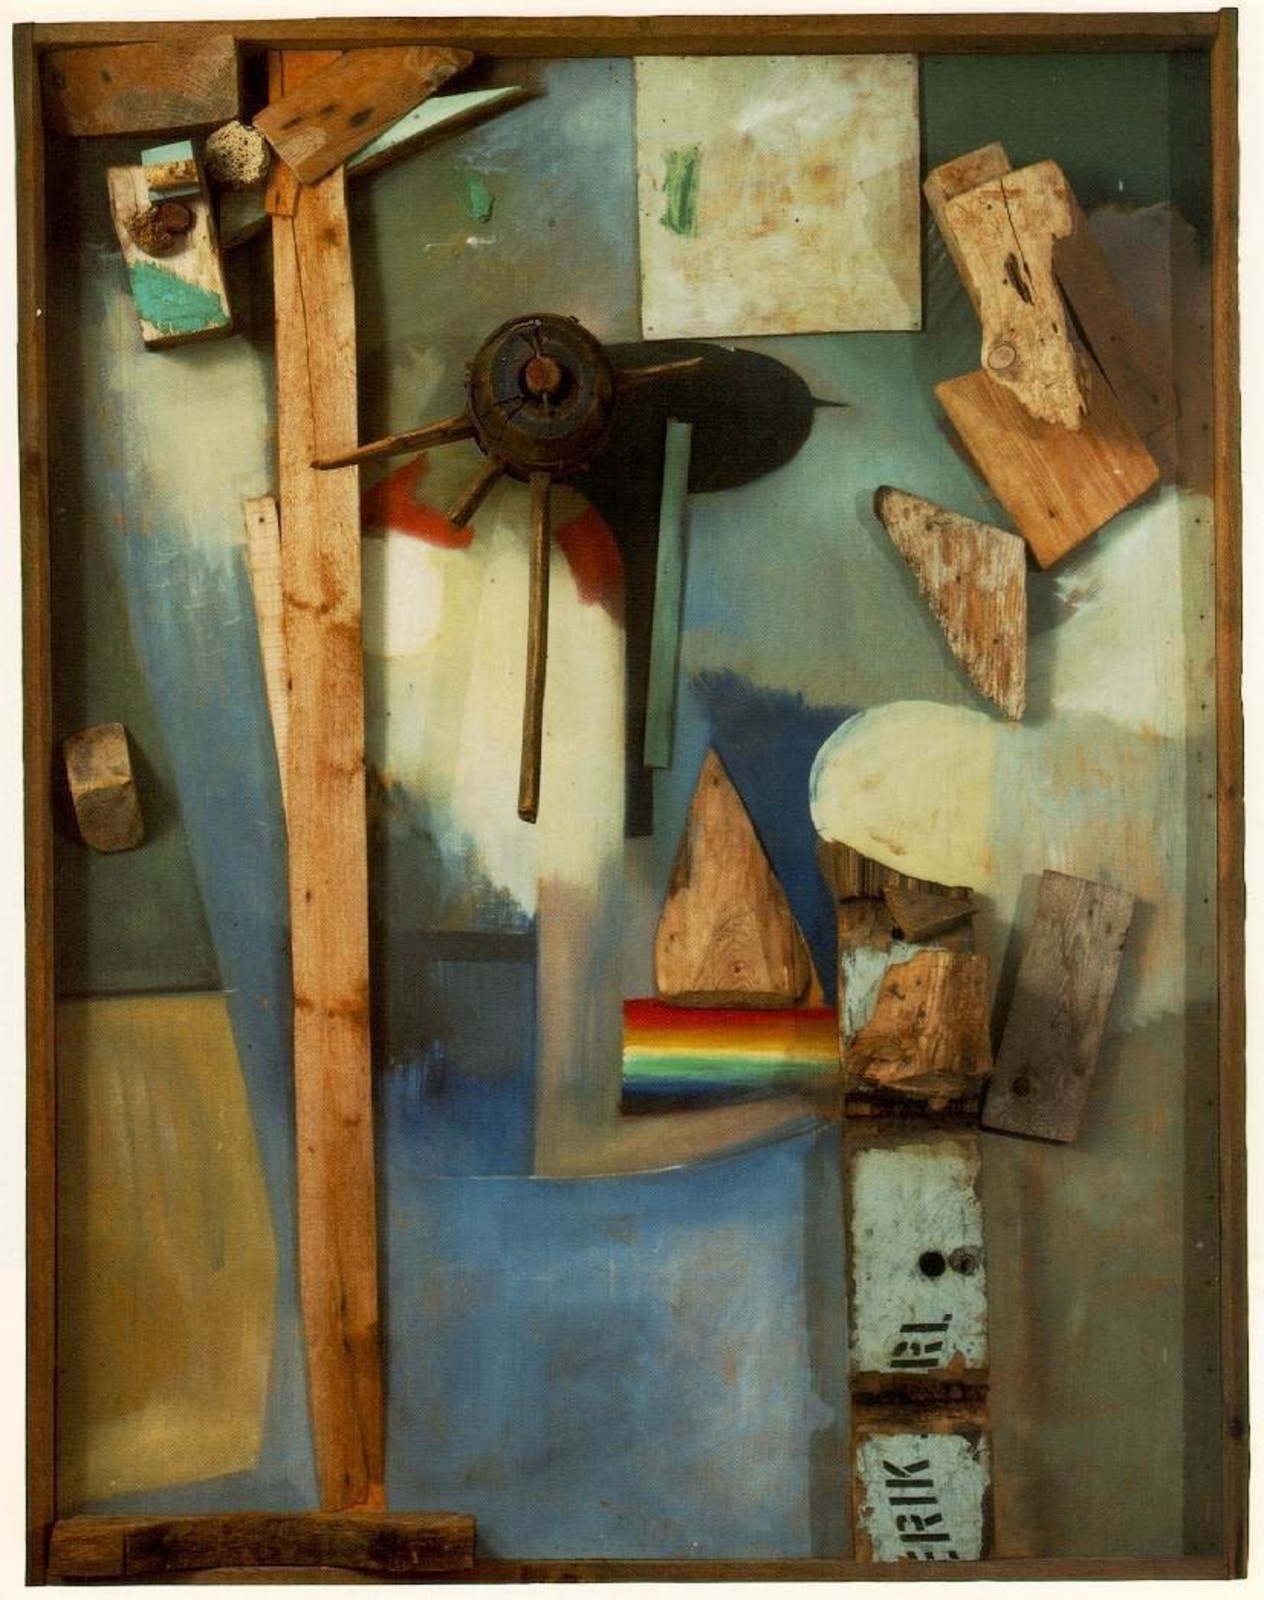 Kurt Schwitters. Merzpicture with Rainbow. 1939. Mixed media and paint on plywood. 155.9 x 121 cm. Private collection.